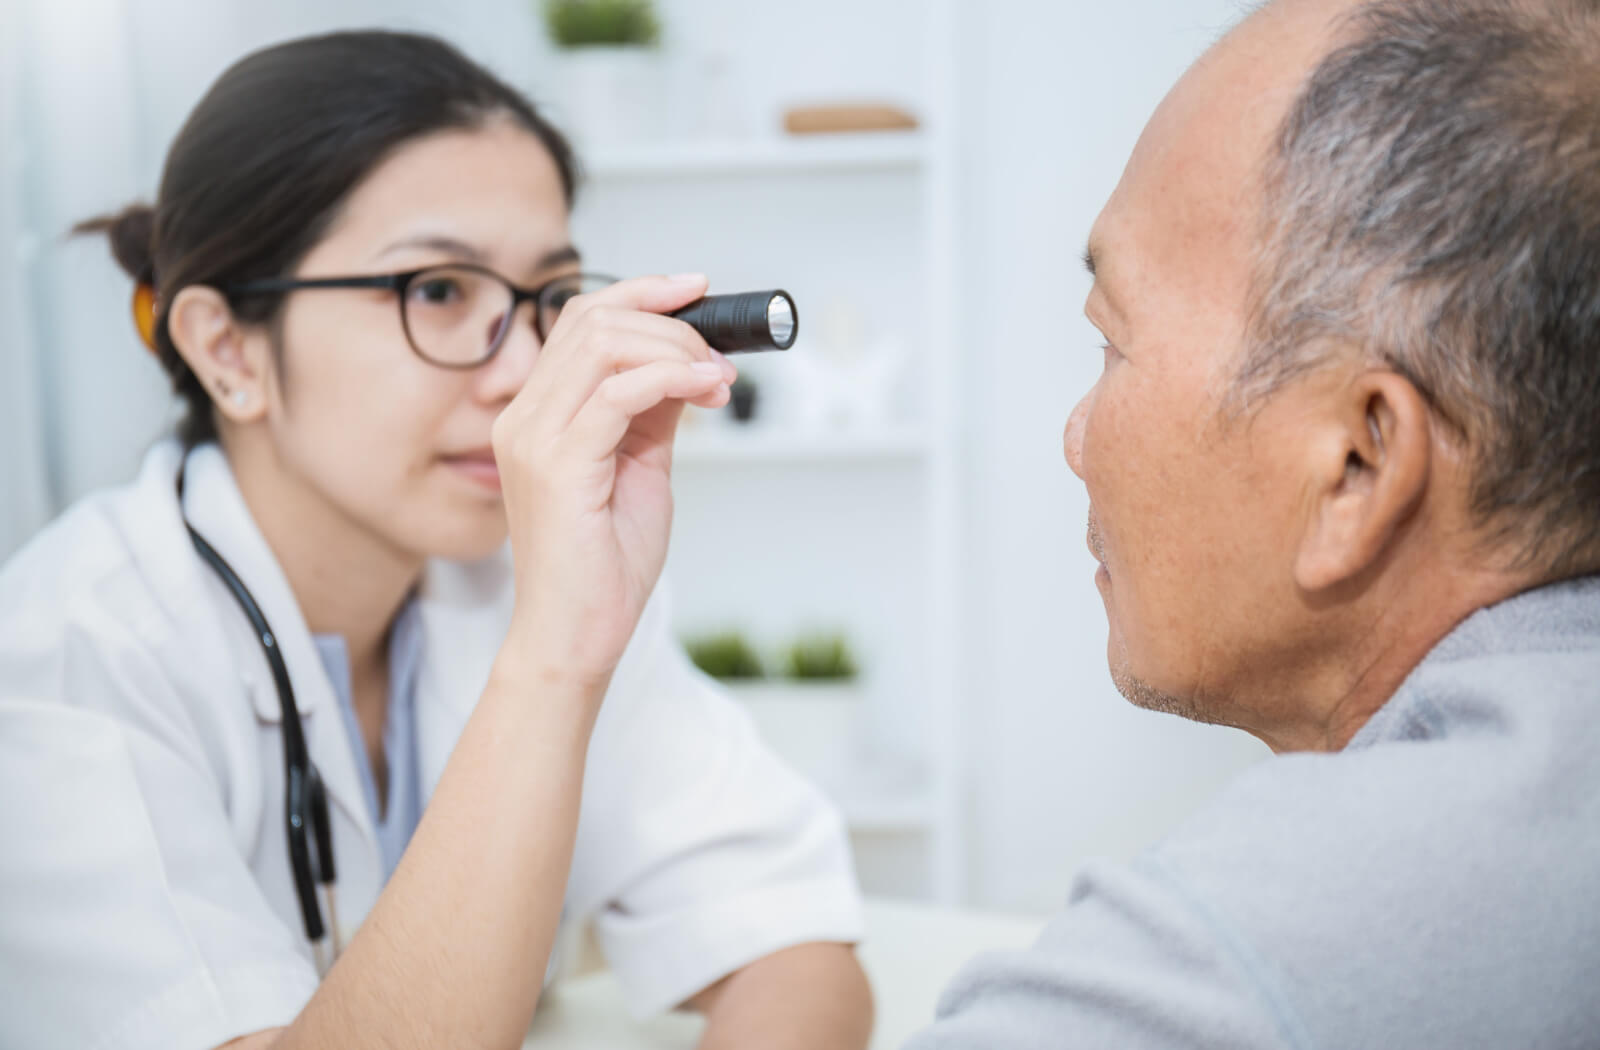 An optometrist examines her patient's eyes with a light.